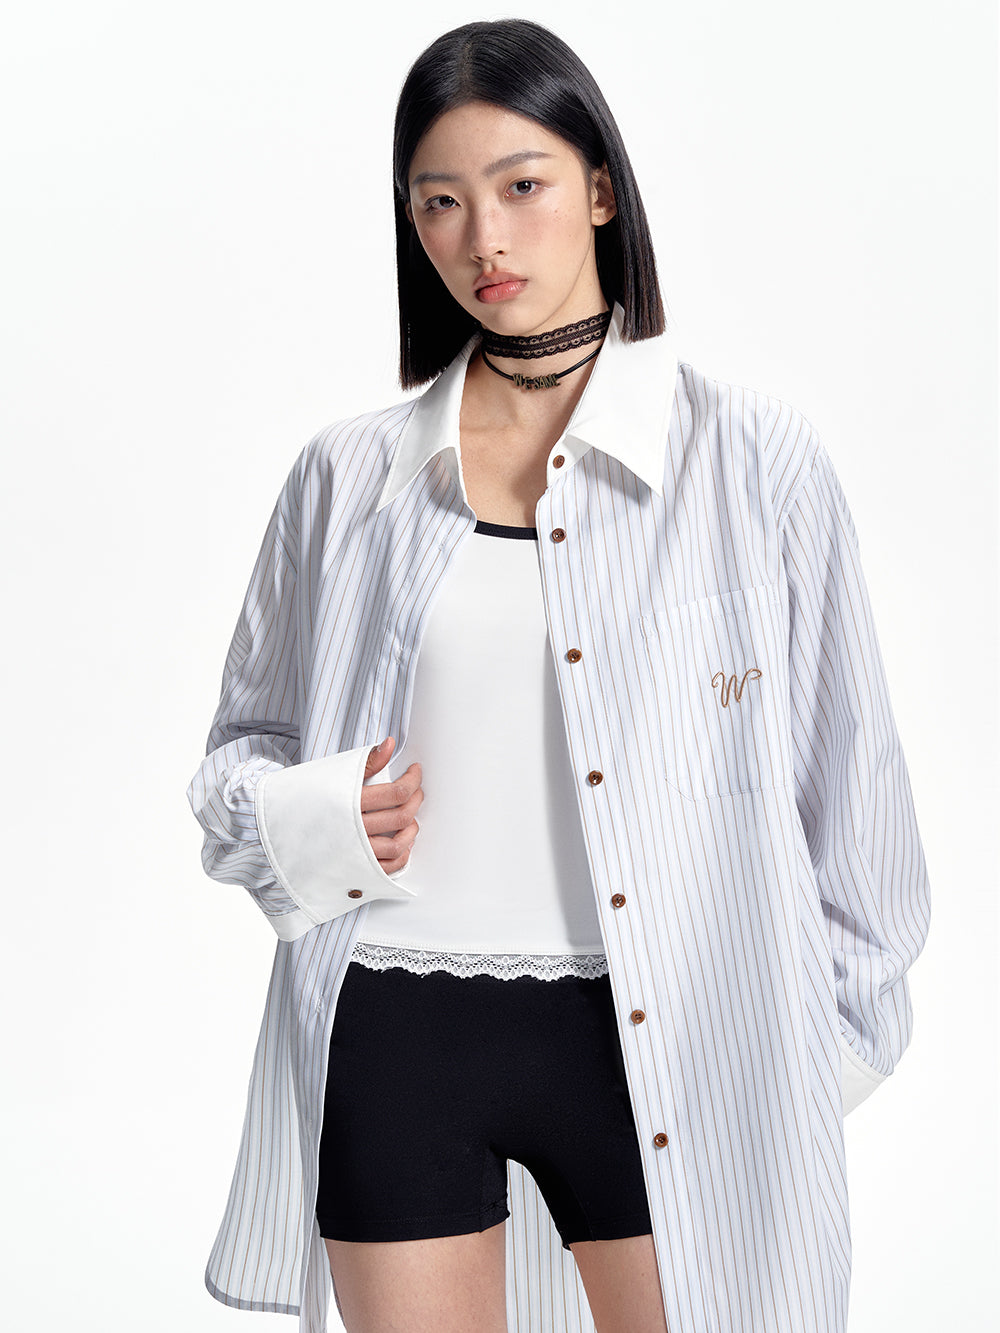 MUKTANK x WESAME Oversized Striped Blue and Brown Long Sleeve Shirt Jacket with Drop Shoulders